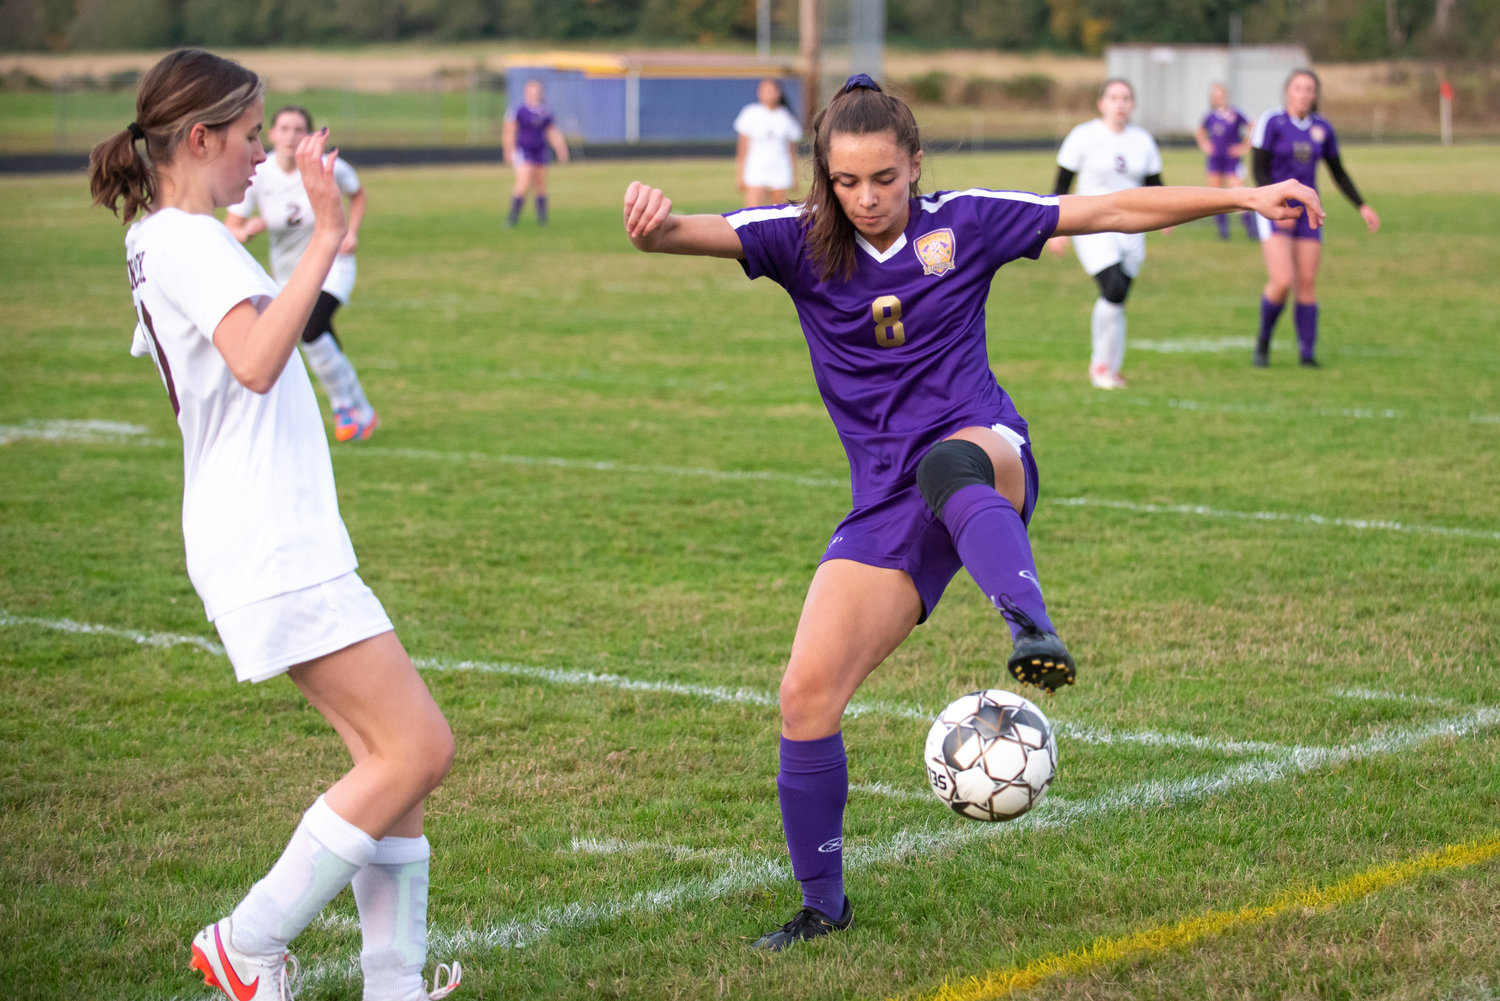 Onalaska junior Brooklyn Sandridge (8) gets control of the ball in front of a Winlock player at home on Monday.